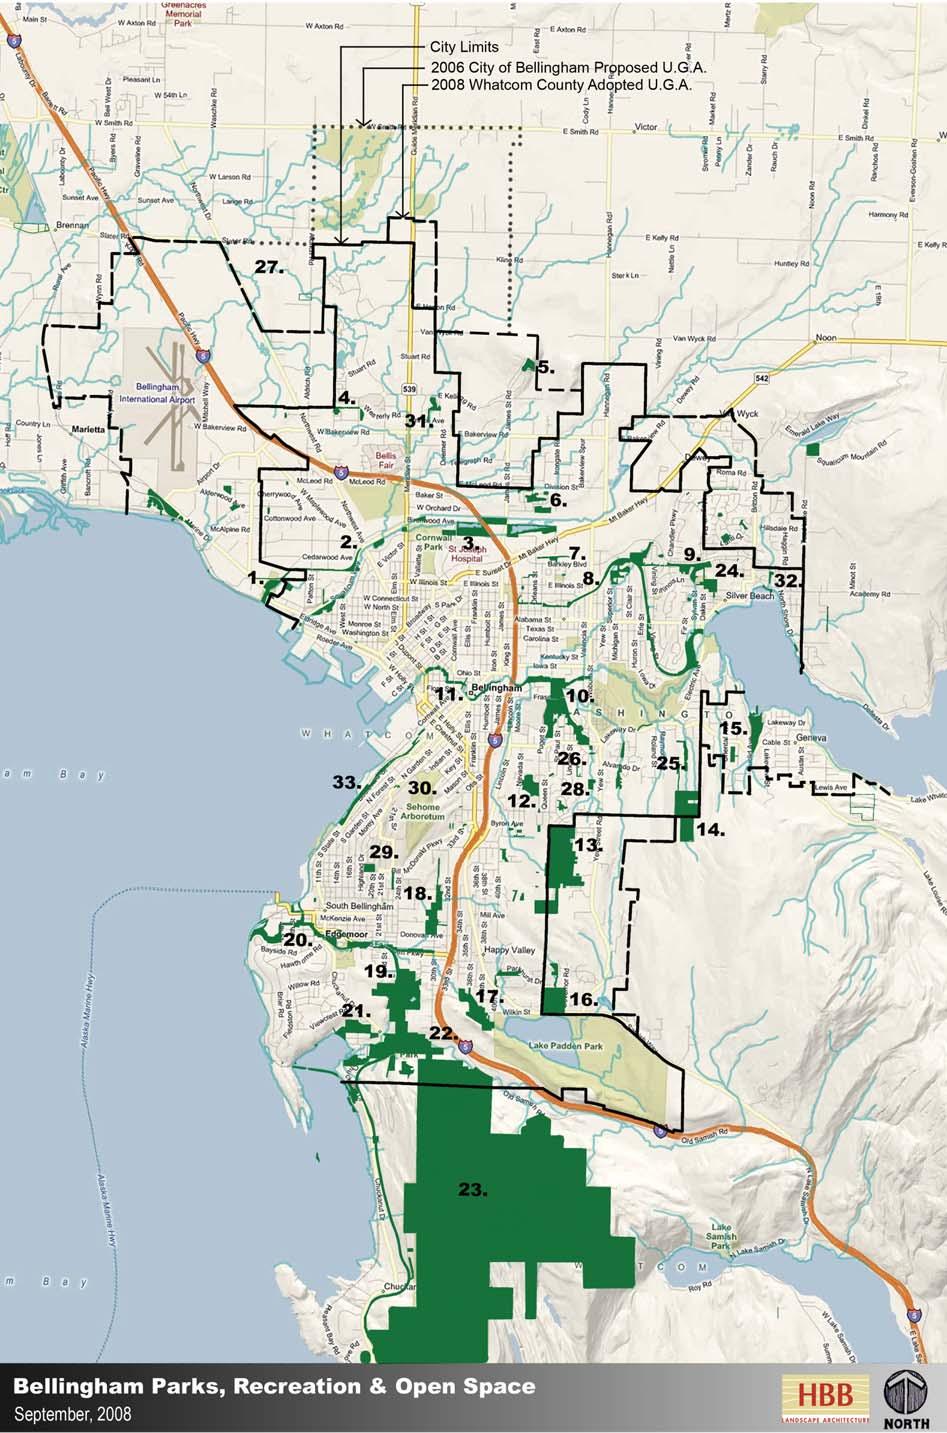 Existing Facilities Plan Open Space Open Space 1. Little Squalicum Park 2. Bay to Baker Greenway 3. Squalicum Creek Greenway 4. Bakerview Open Space 5. King Mountain 6. Orchard Estates Wetlands 7.